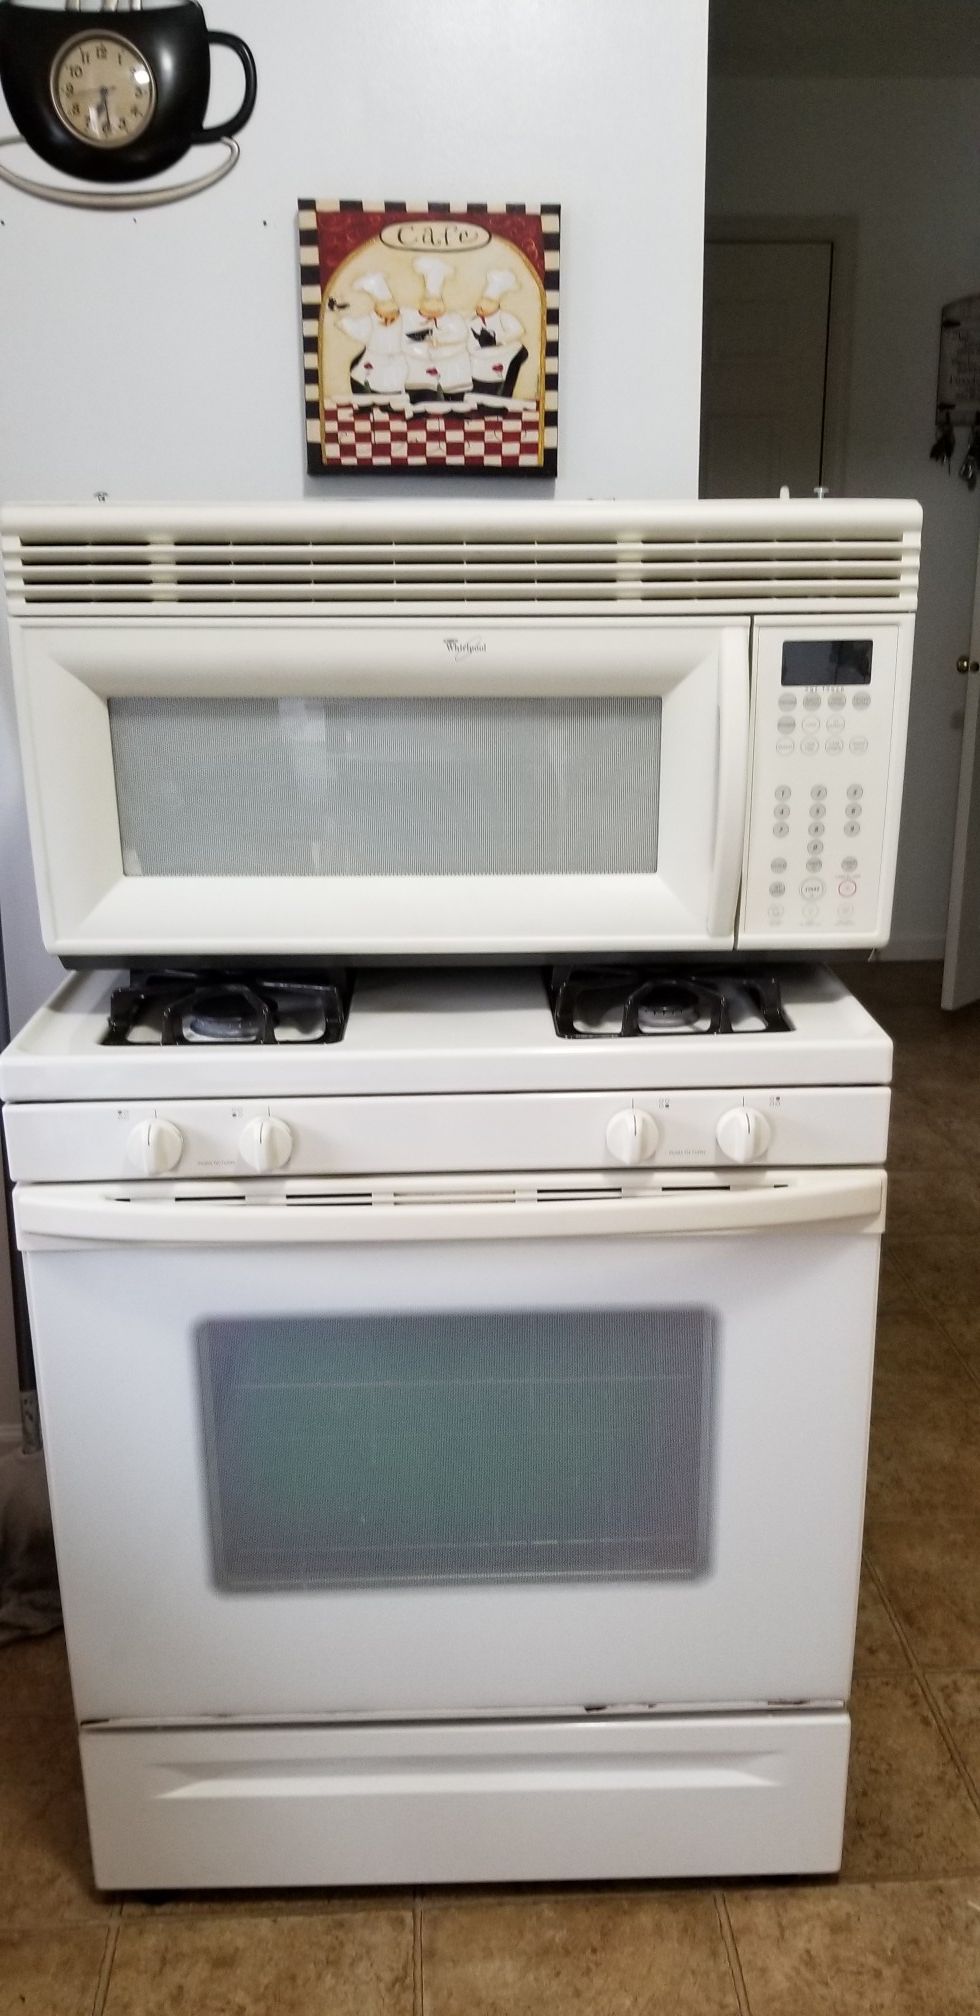 Whirlpool stove and conventional microwave